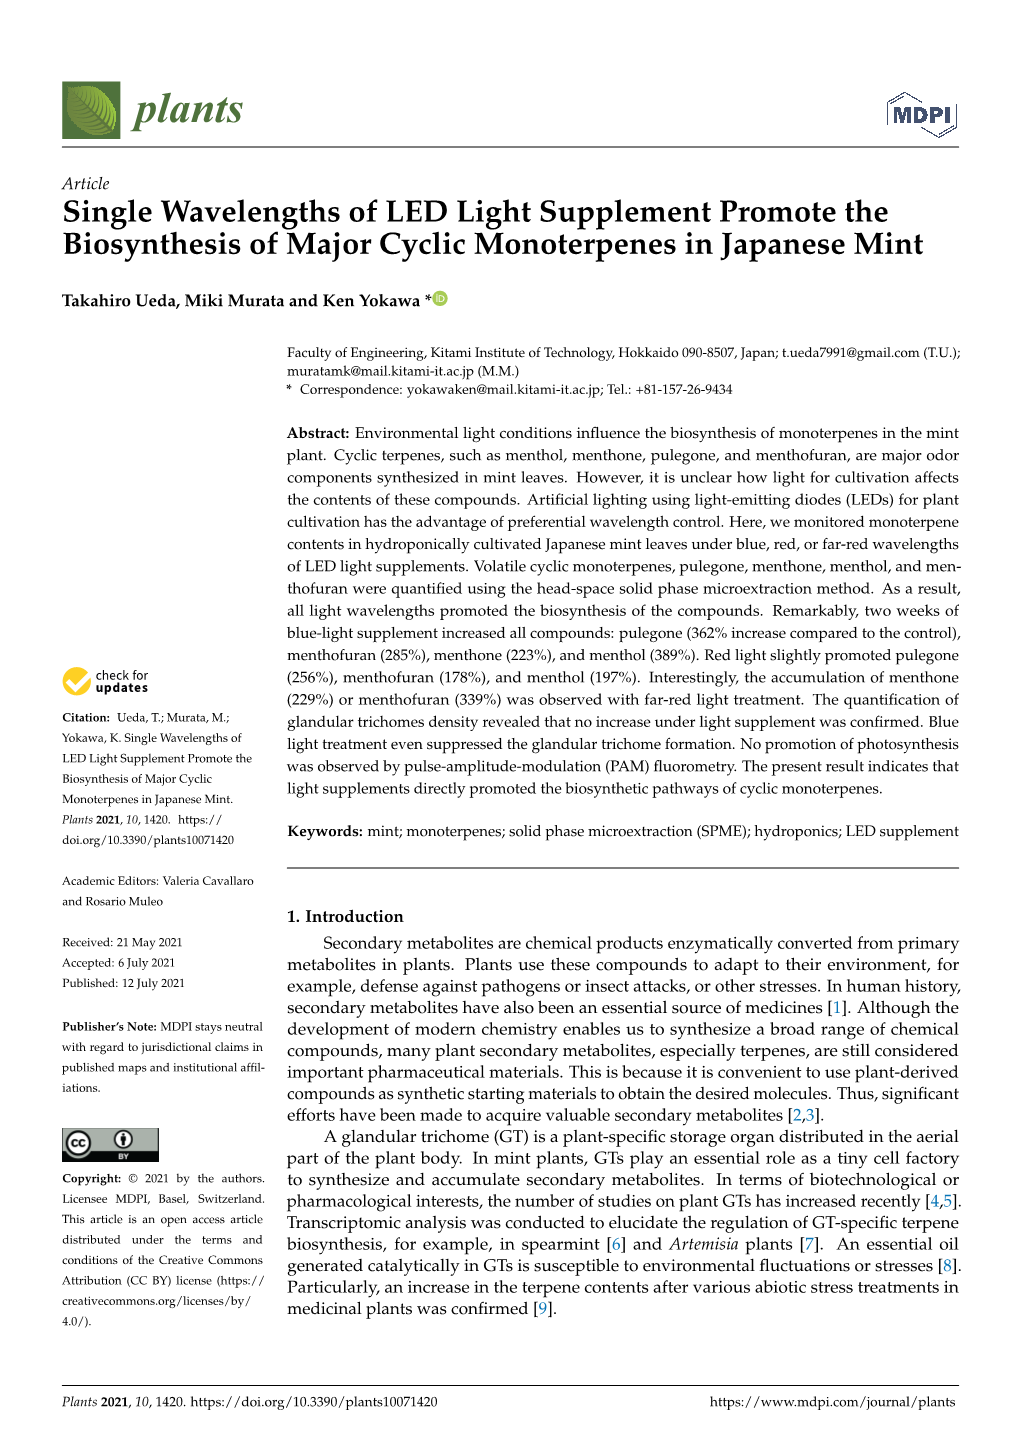 Single Wavelengths of LED Light Supplement Promote the Biosynthesis of Major Cyclic Monoterpenes in Japanese Mint